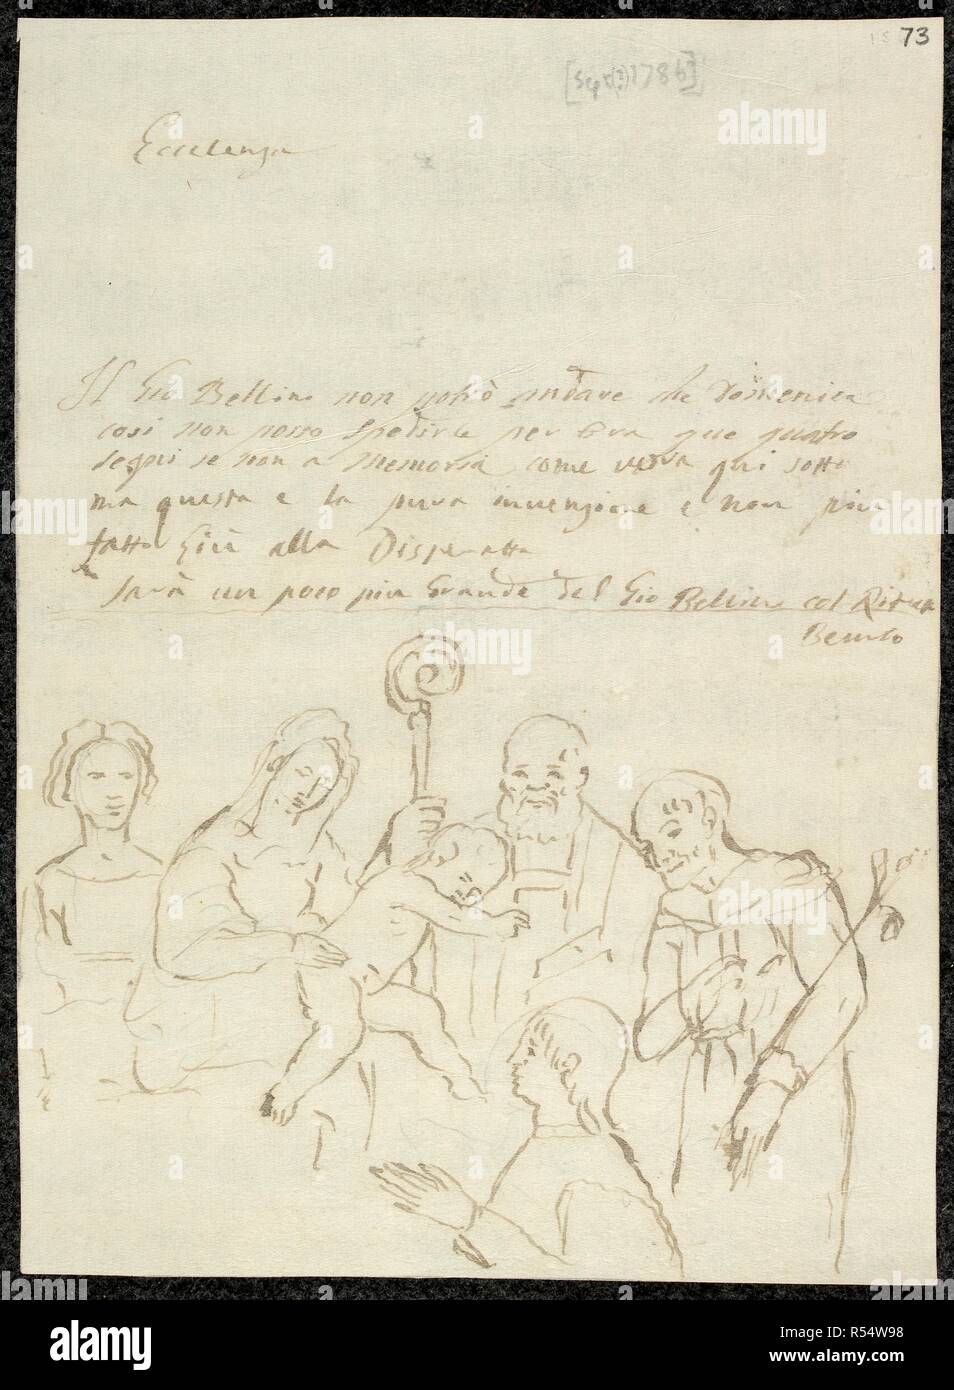 Sketch of old master painting from Letters from Giovanni Maria Sasso. Letters from Giovanni Maria Sasso, Italian artist and dealer,. ff. 31-85. Letters from Giovanni Maria Sasso, Italian artist and dealer, with sketches of old master paintings, manuscript lists of paintings in Sasso's hand, etc.; 20 Jan. 1775 (1785?) - 17 Oct. 1786, n.d. Source: Add. 60537 f.73. Stock Photo